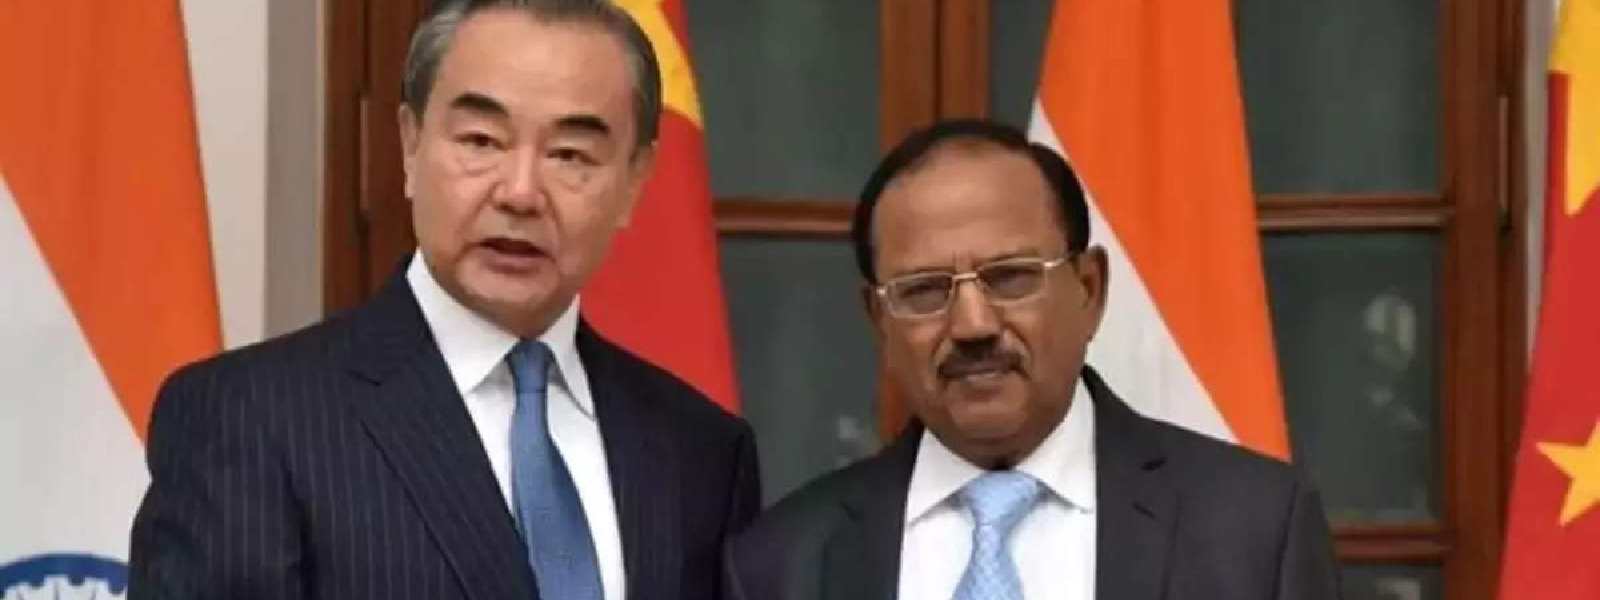 Ajit Doval talks tough on LAC with China's Wang